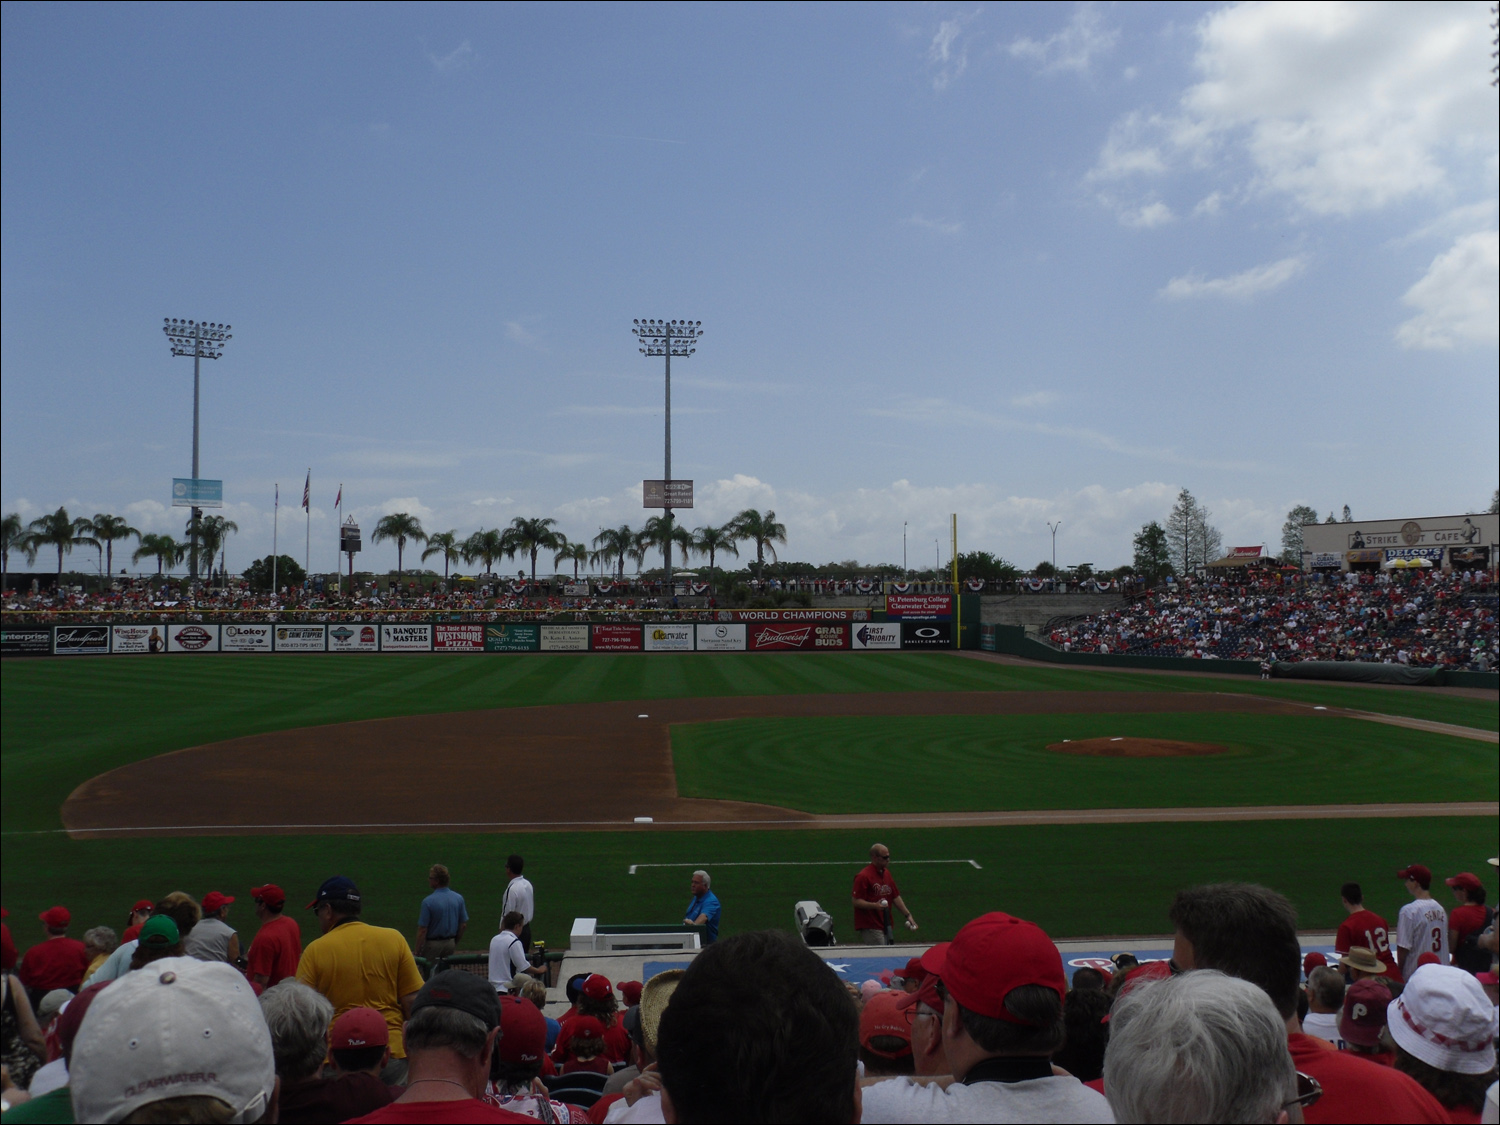 Phillies-Yankees spring training game in Clearwater, FL